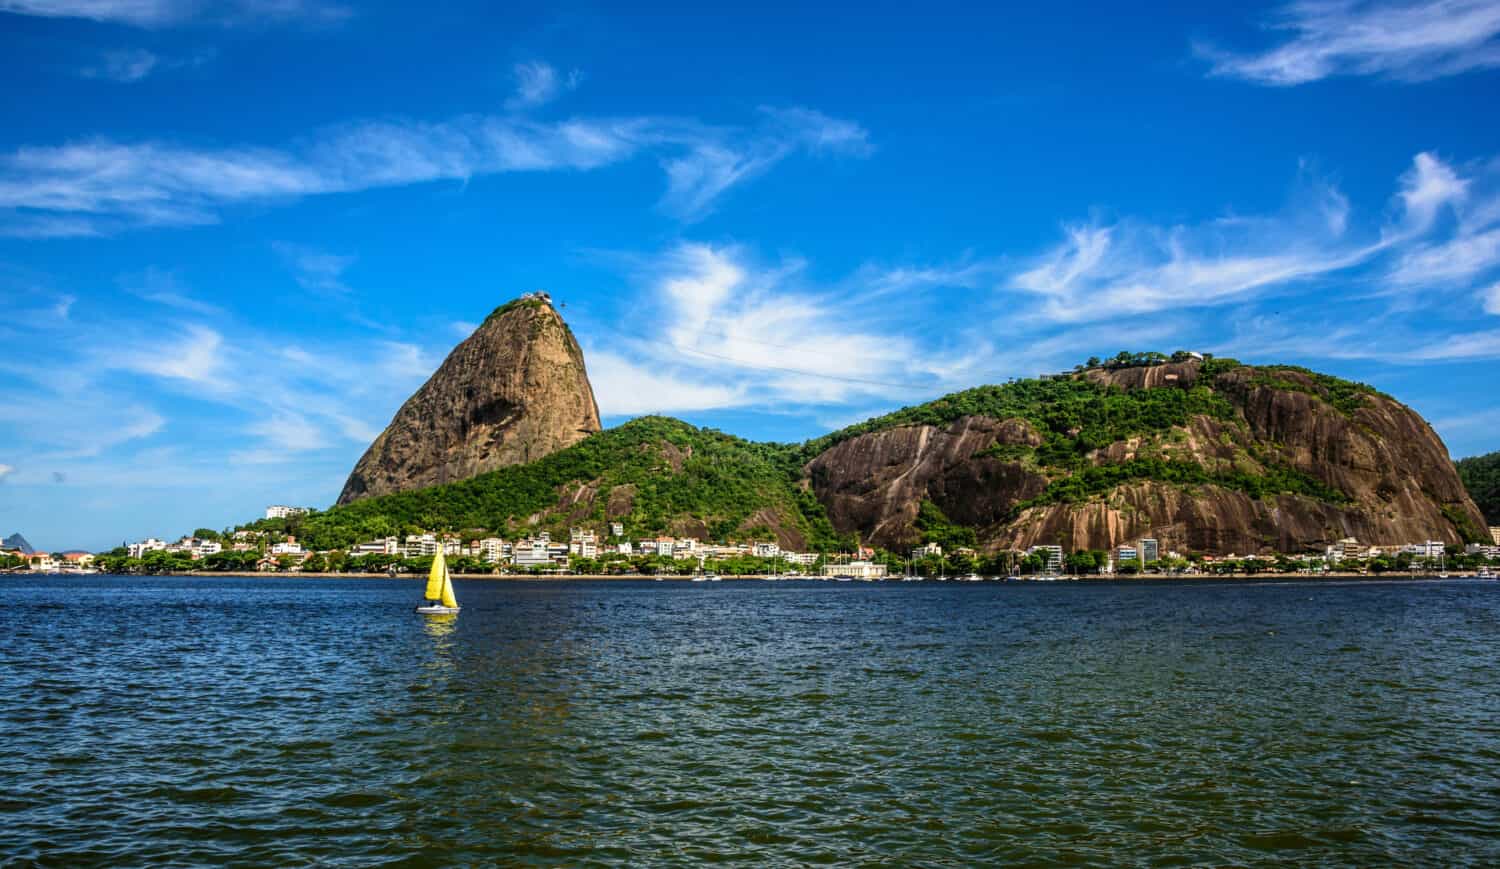 Yellow small yacht sailing and classic daytime scenic profile view of Sugarloaf Mountain (Pao de Acucar) standing above Botafogo Bay in Rio de Janeiro, Brazil